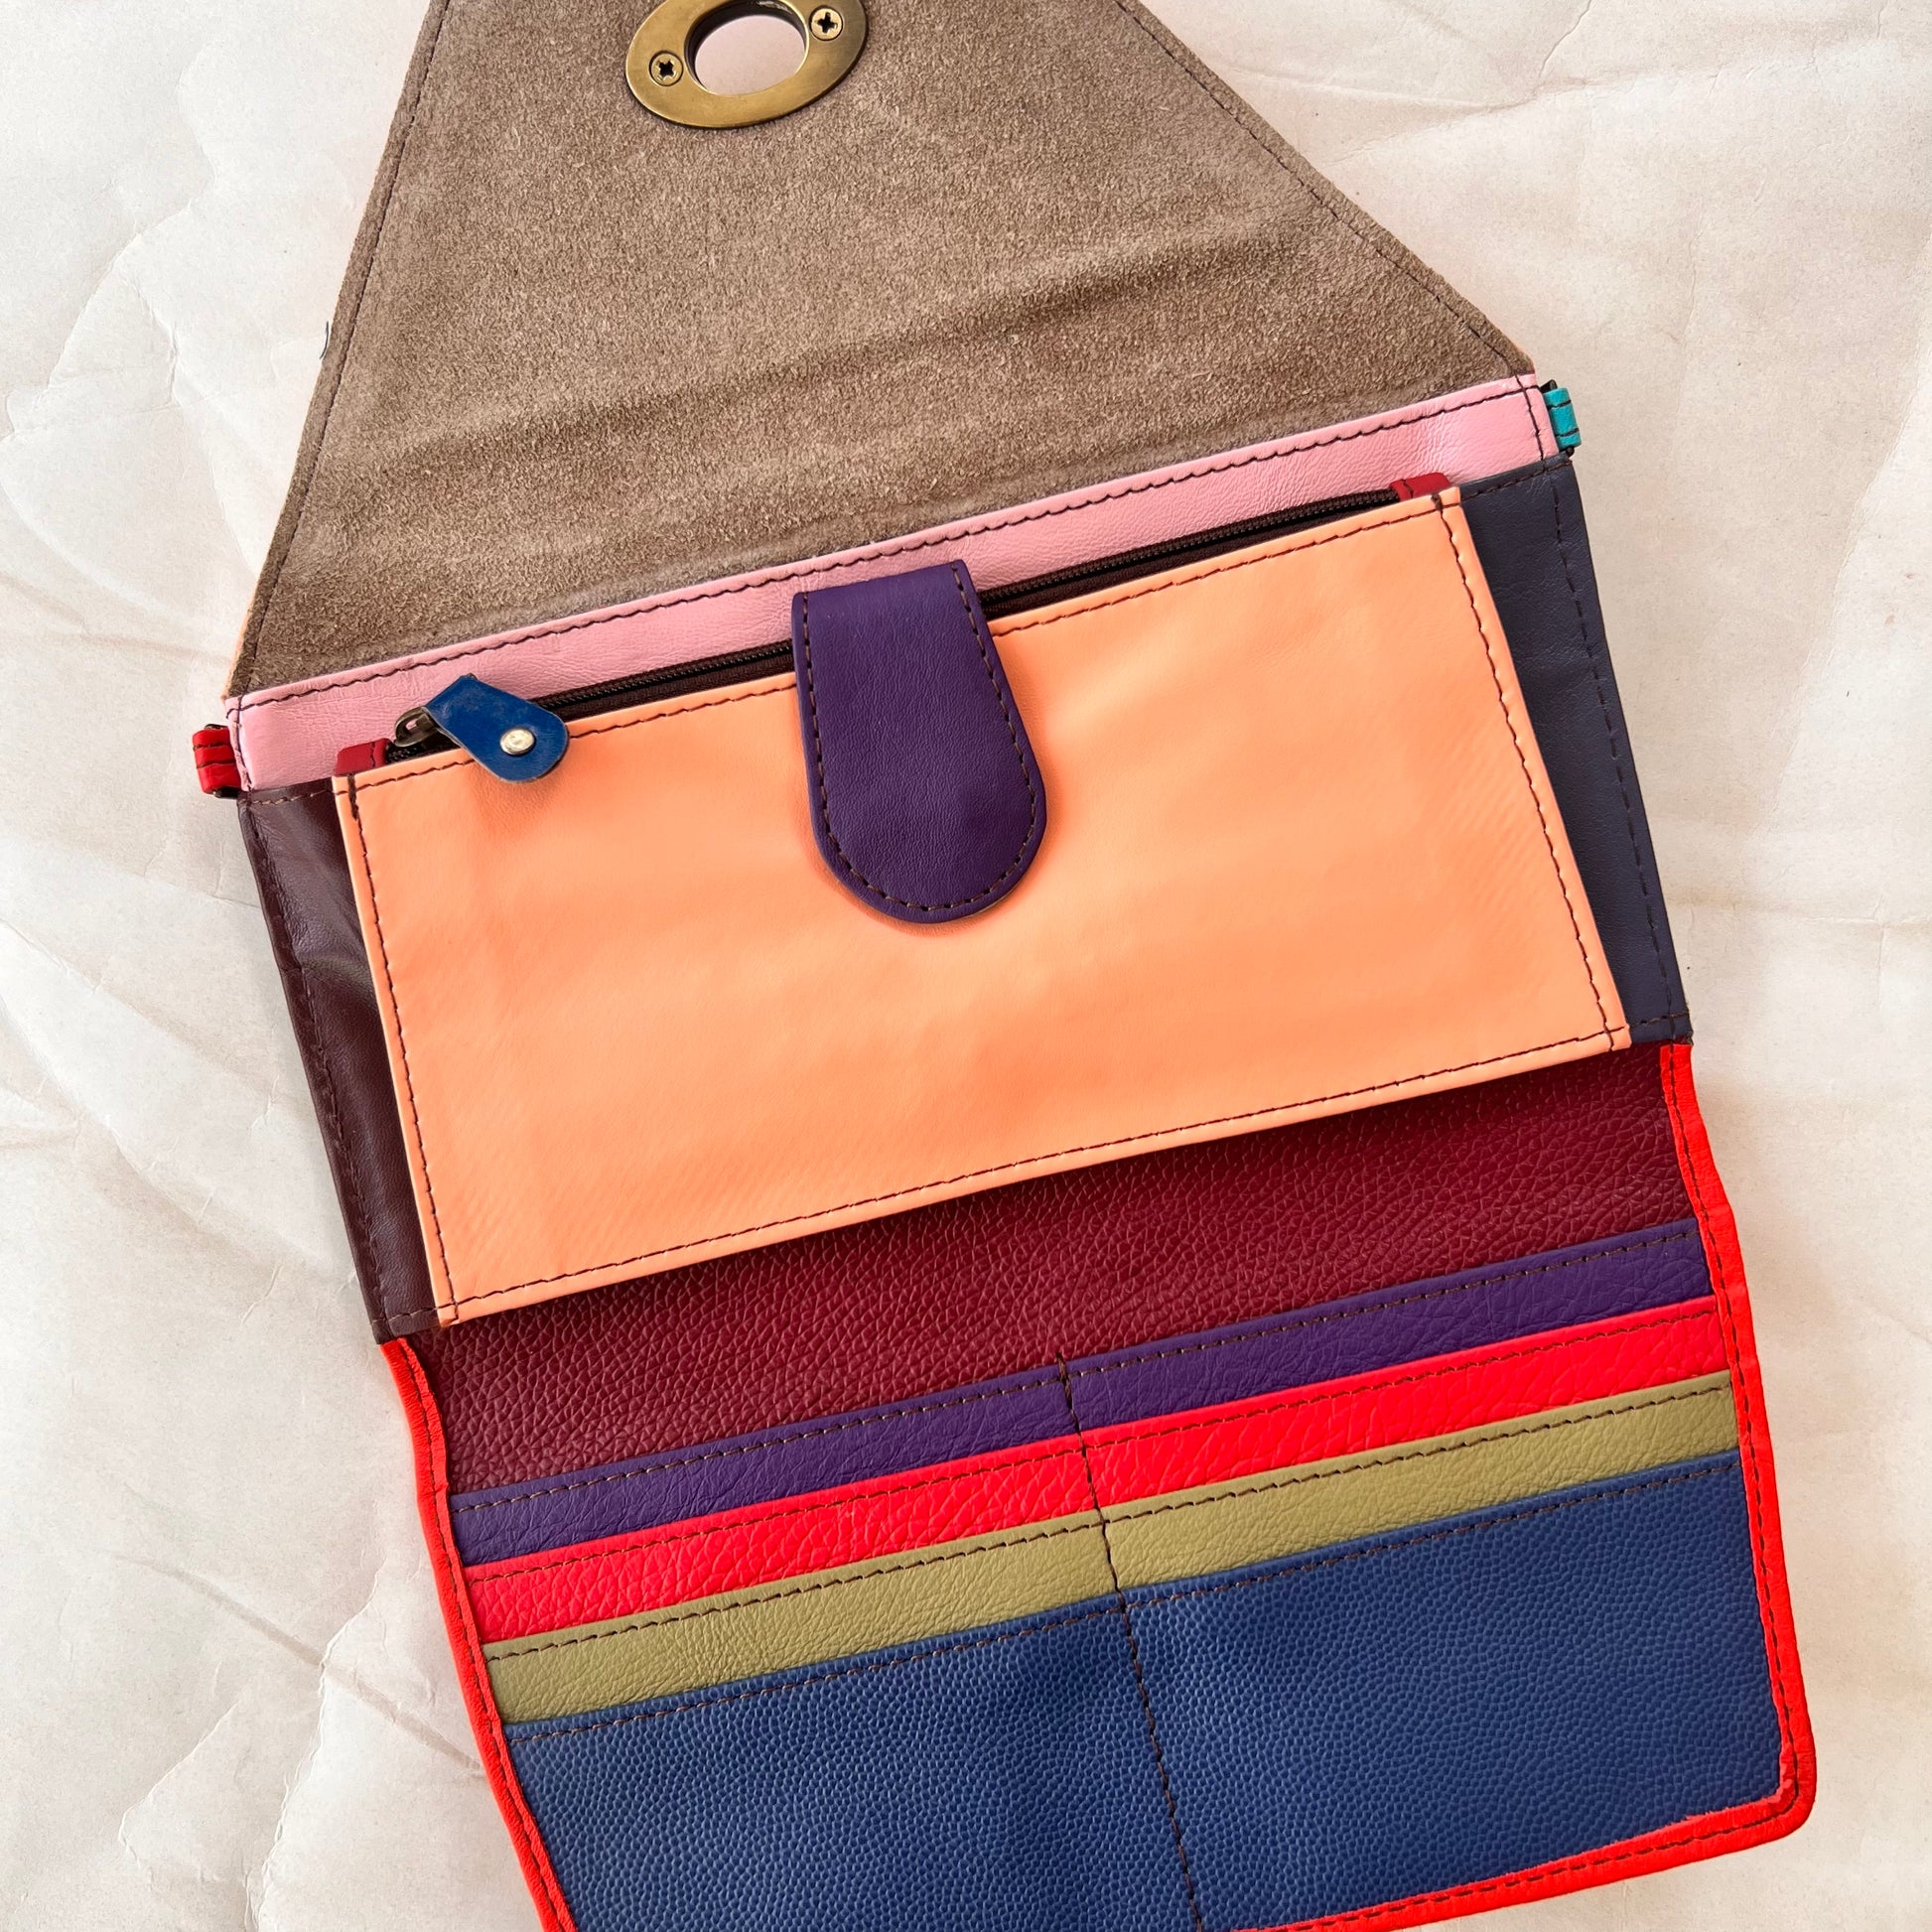 interior view of secret clutch wallet showing colorful card slots and other pockets.